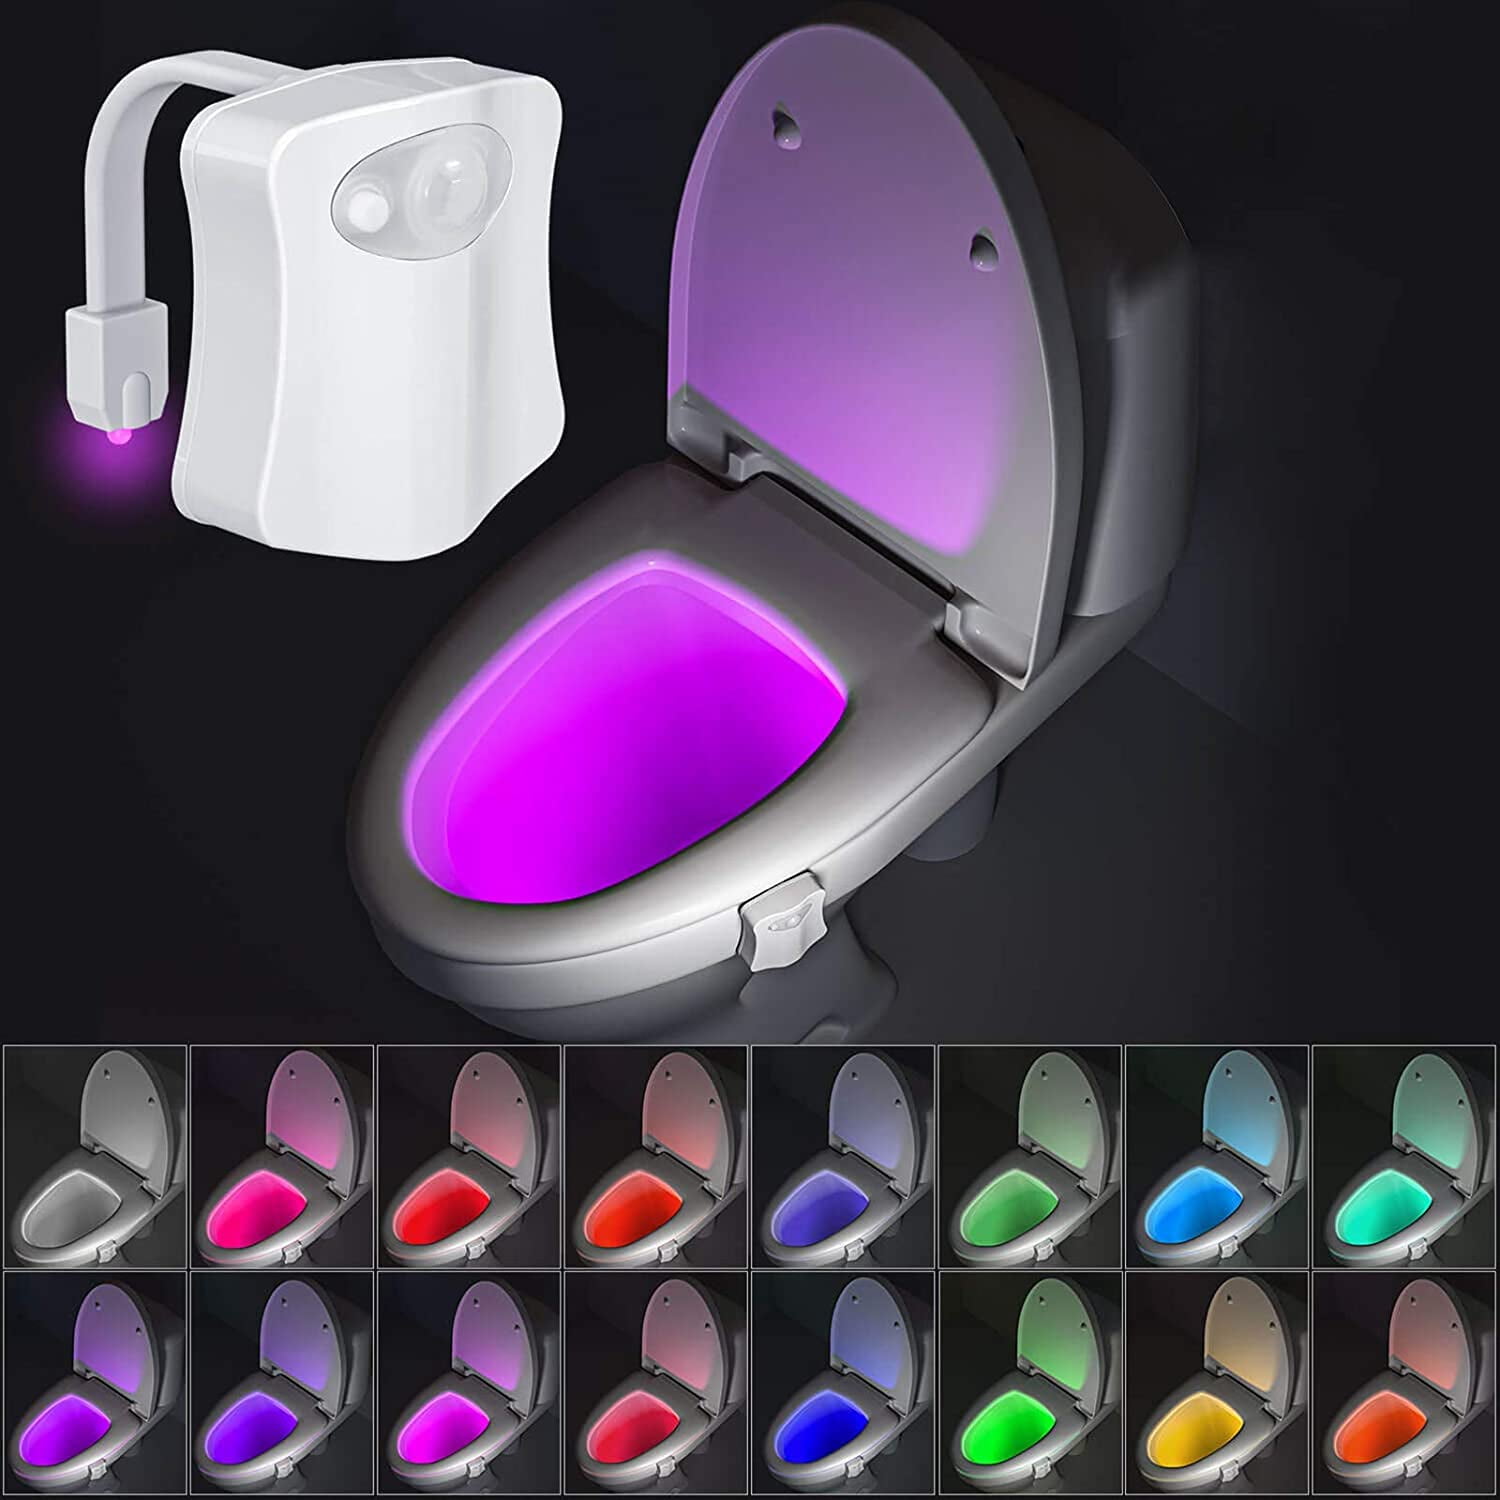 Toilet Bowl Light Motion Activated 13 Color LED Lights Up Night Glow Sensor New 